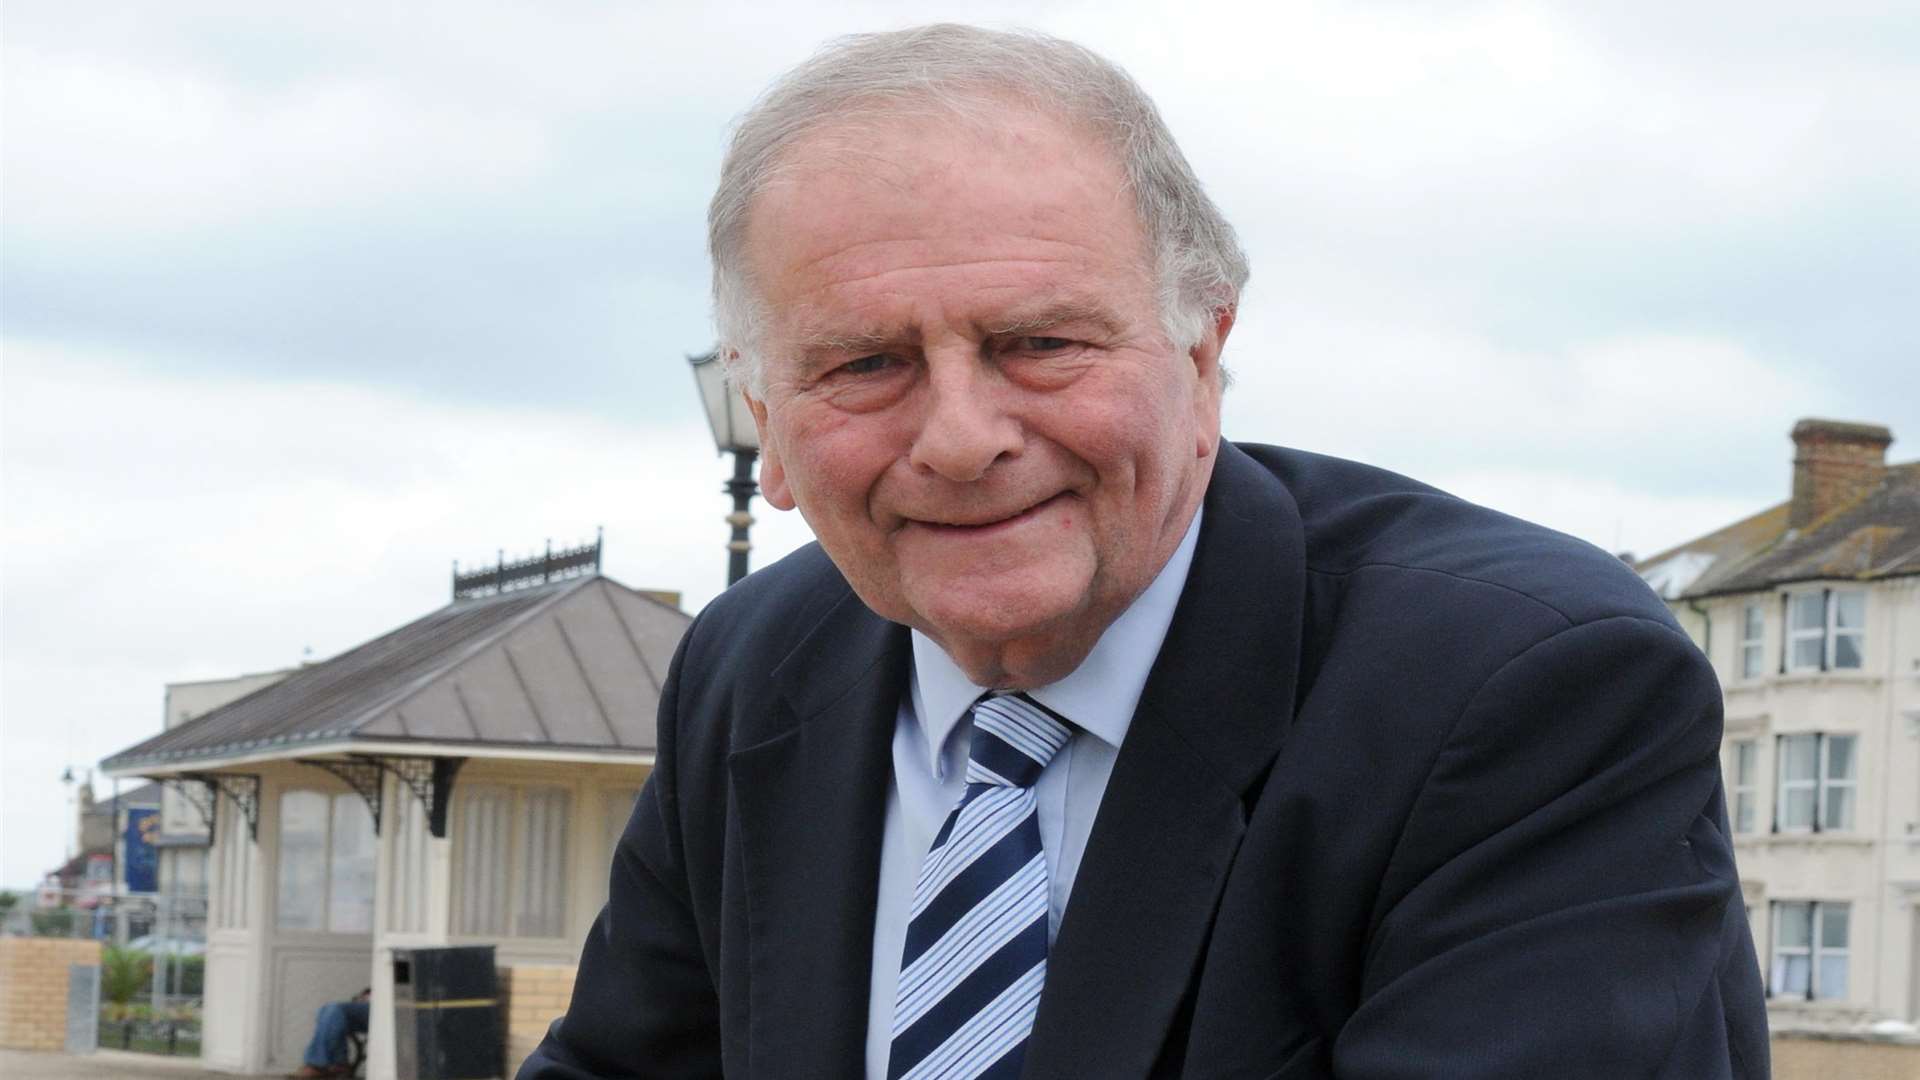 Thanet North MP Sir Roger Gale